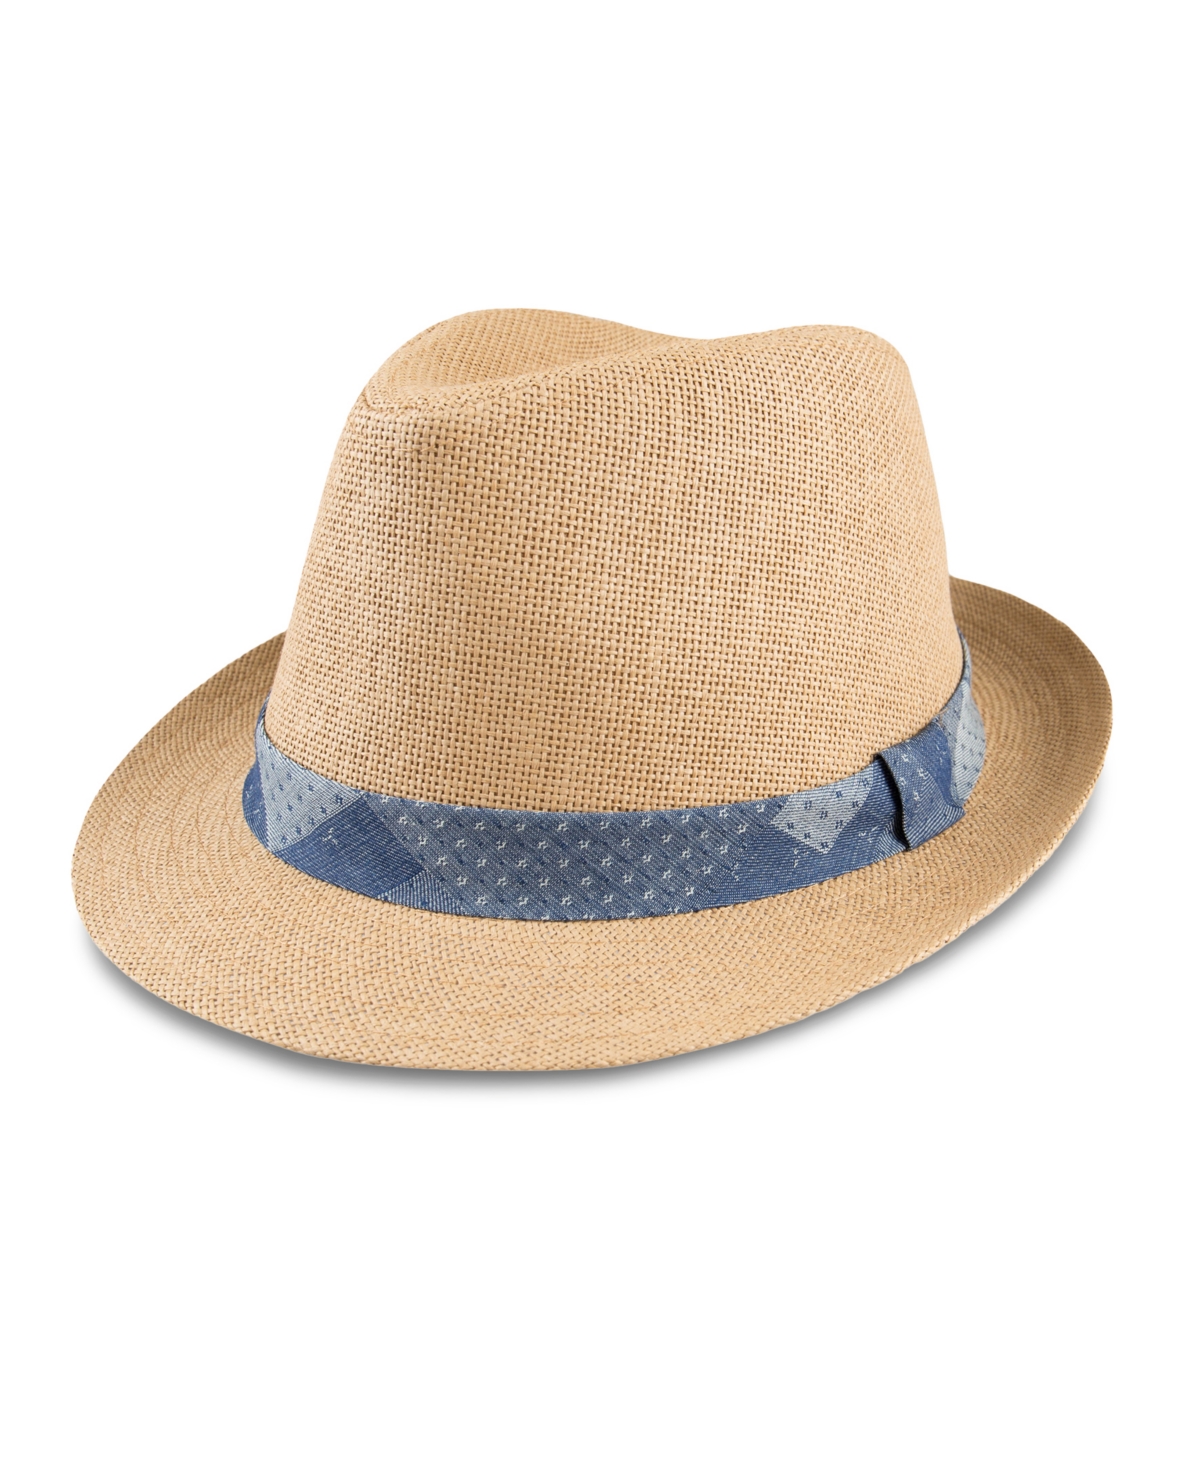 Levi's Men's Straw Fedora Hat With Denim Patchwork Band In Tan